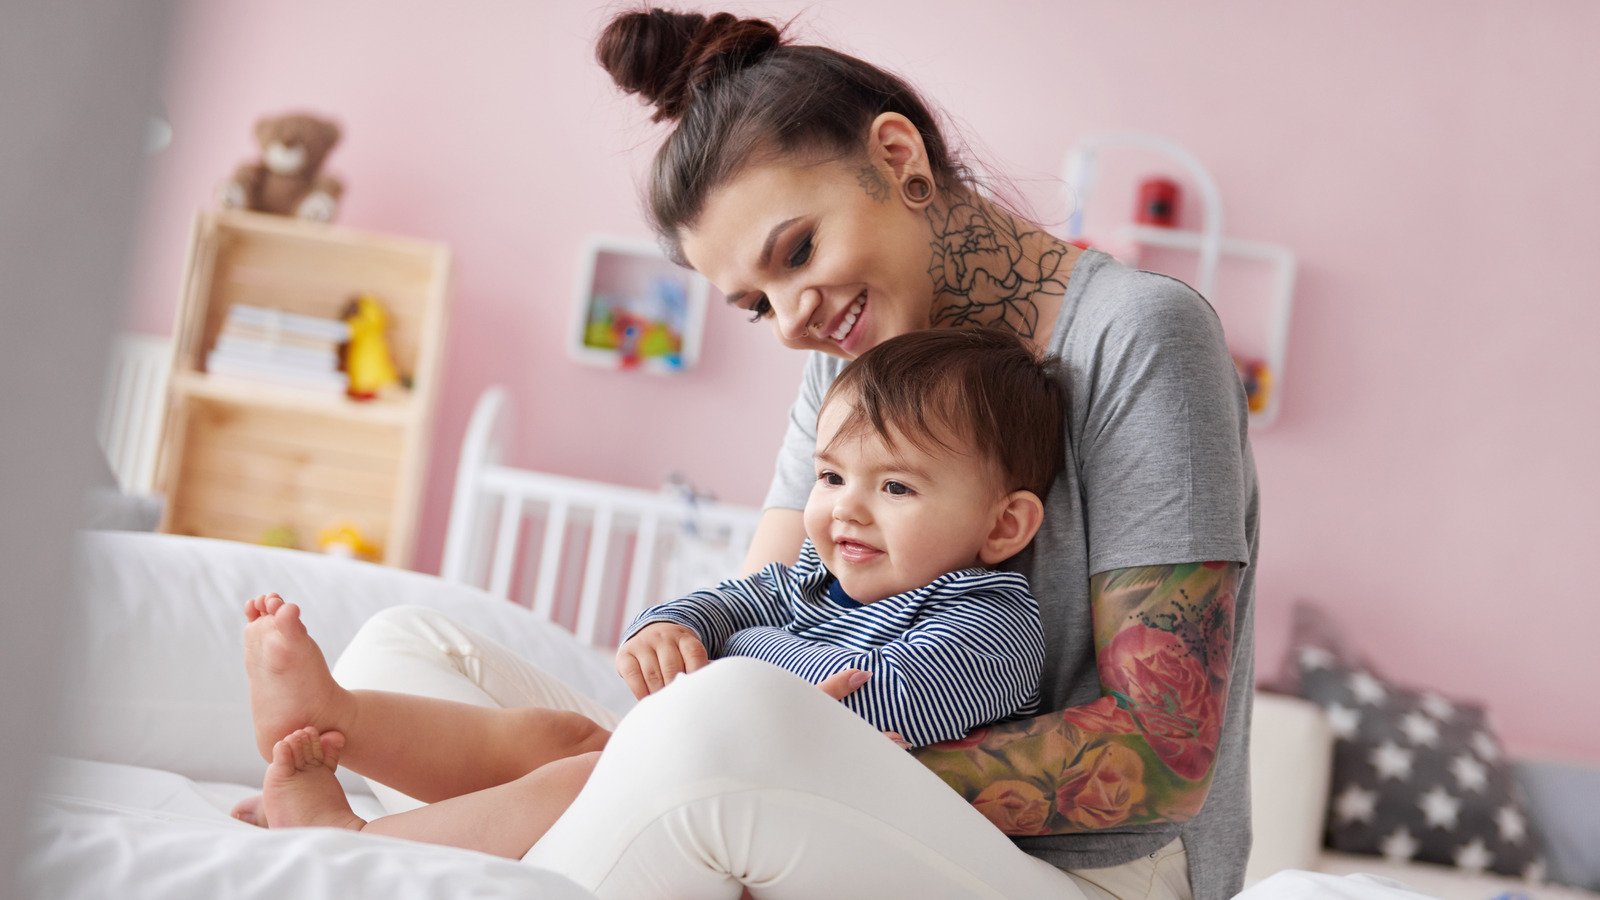 Is It Safe To Get A Tattoo While Breastfeeding? - Health Digest